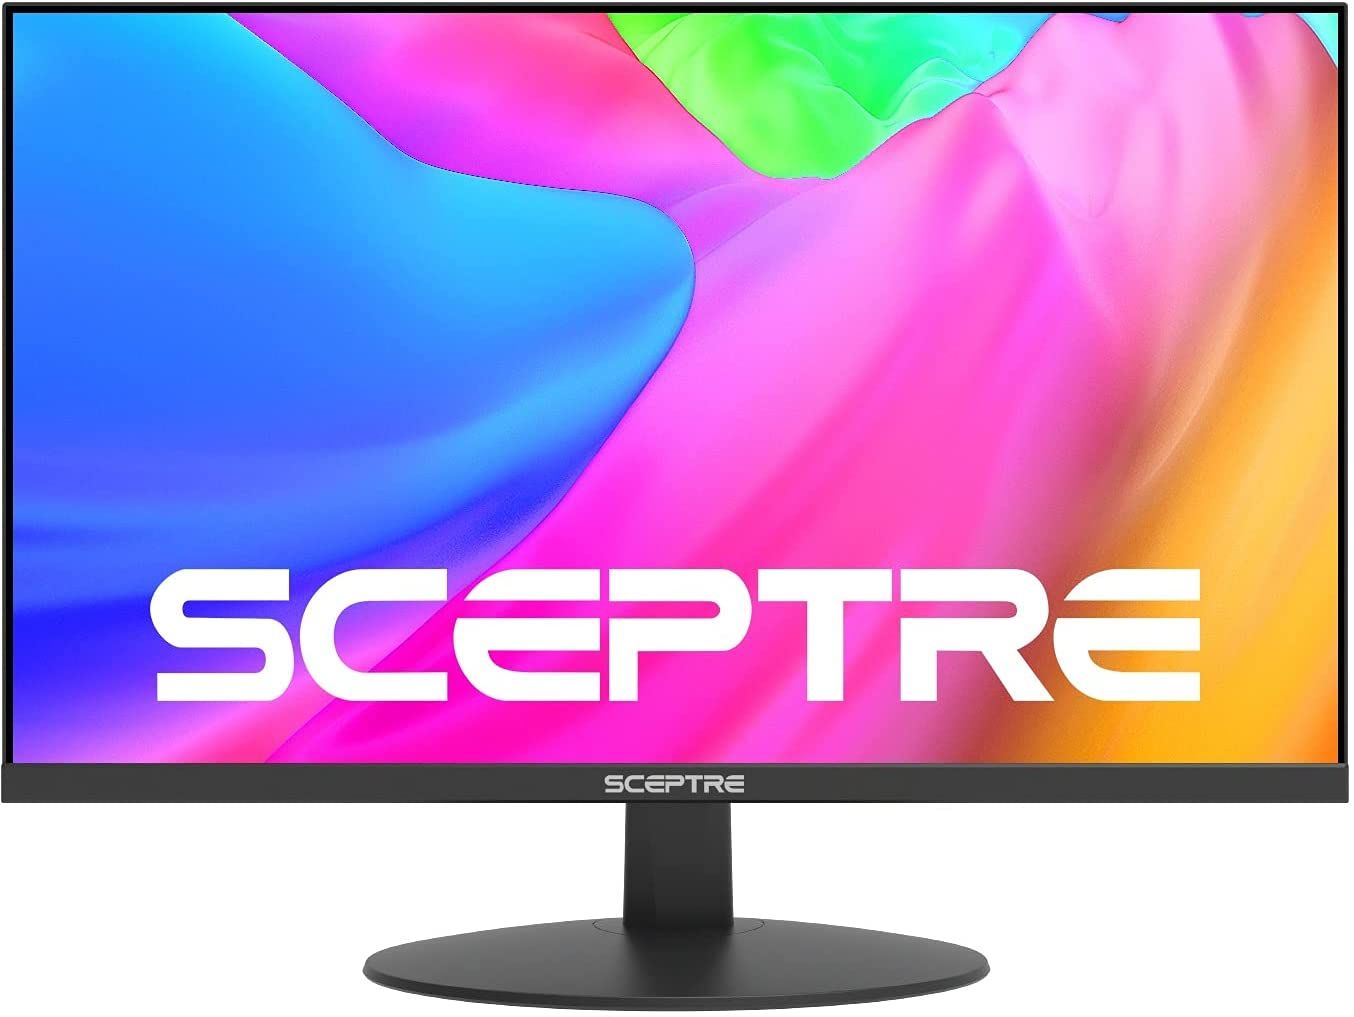 Sceptre - best monitor for watching movies